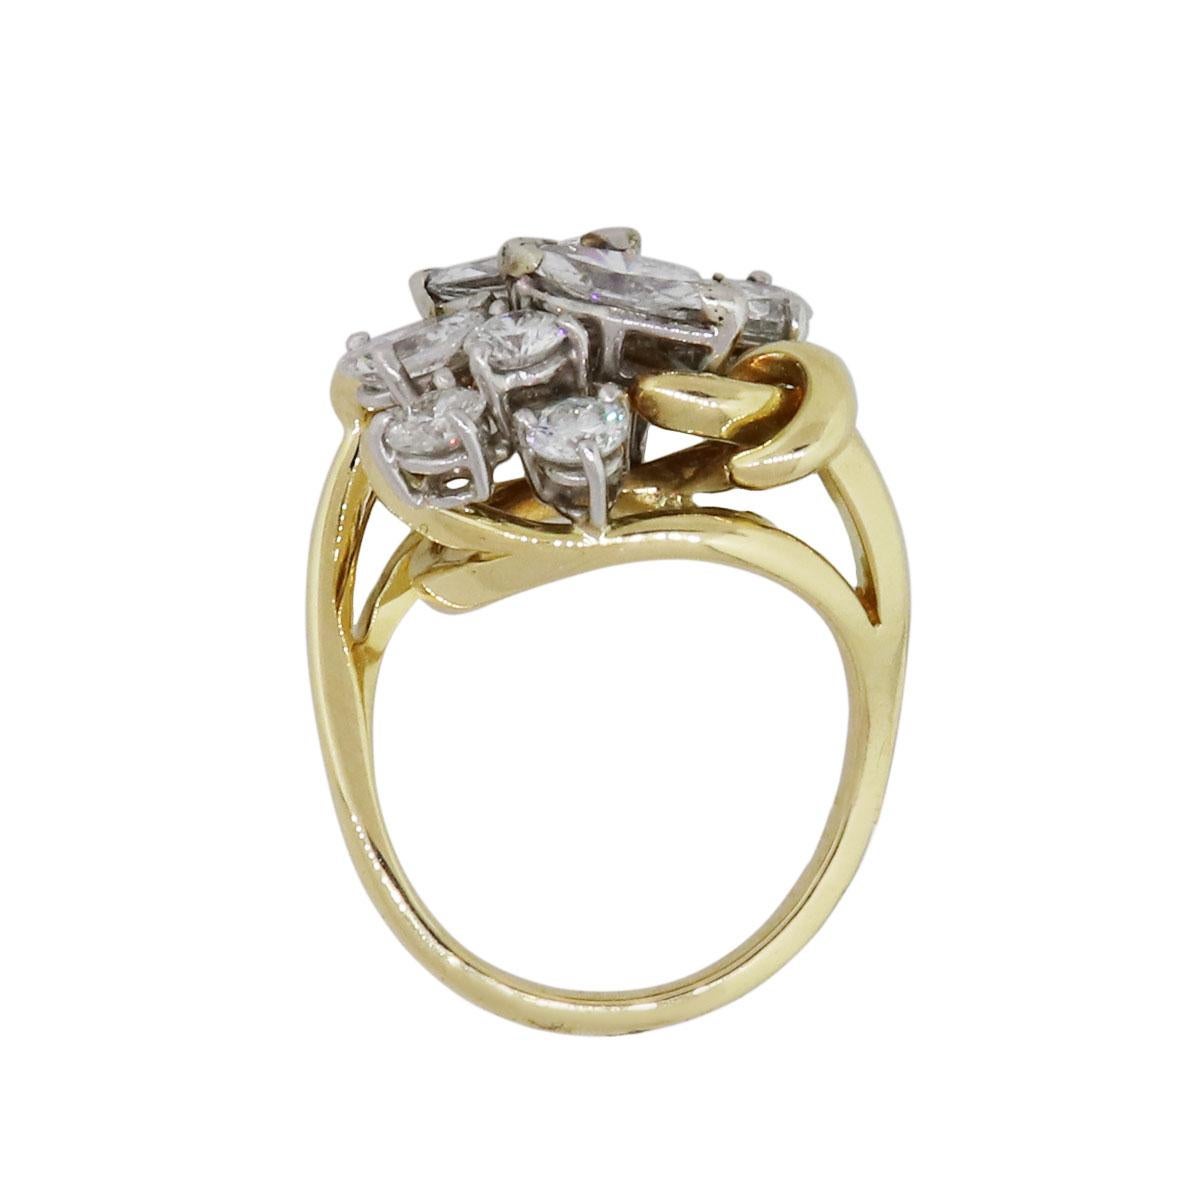 Material: 14k yellow gold
Diamond Details: Approximately 3ctw of round brilliant, pear shape and marquise shape diamonds. Diamonds are G/H in color and VS in clarity
Ring Size: 6 (can be sized)
Ring Measurements: 1.12″ x 0.61″ x 0.87″
Total Weight: